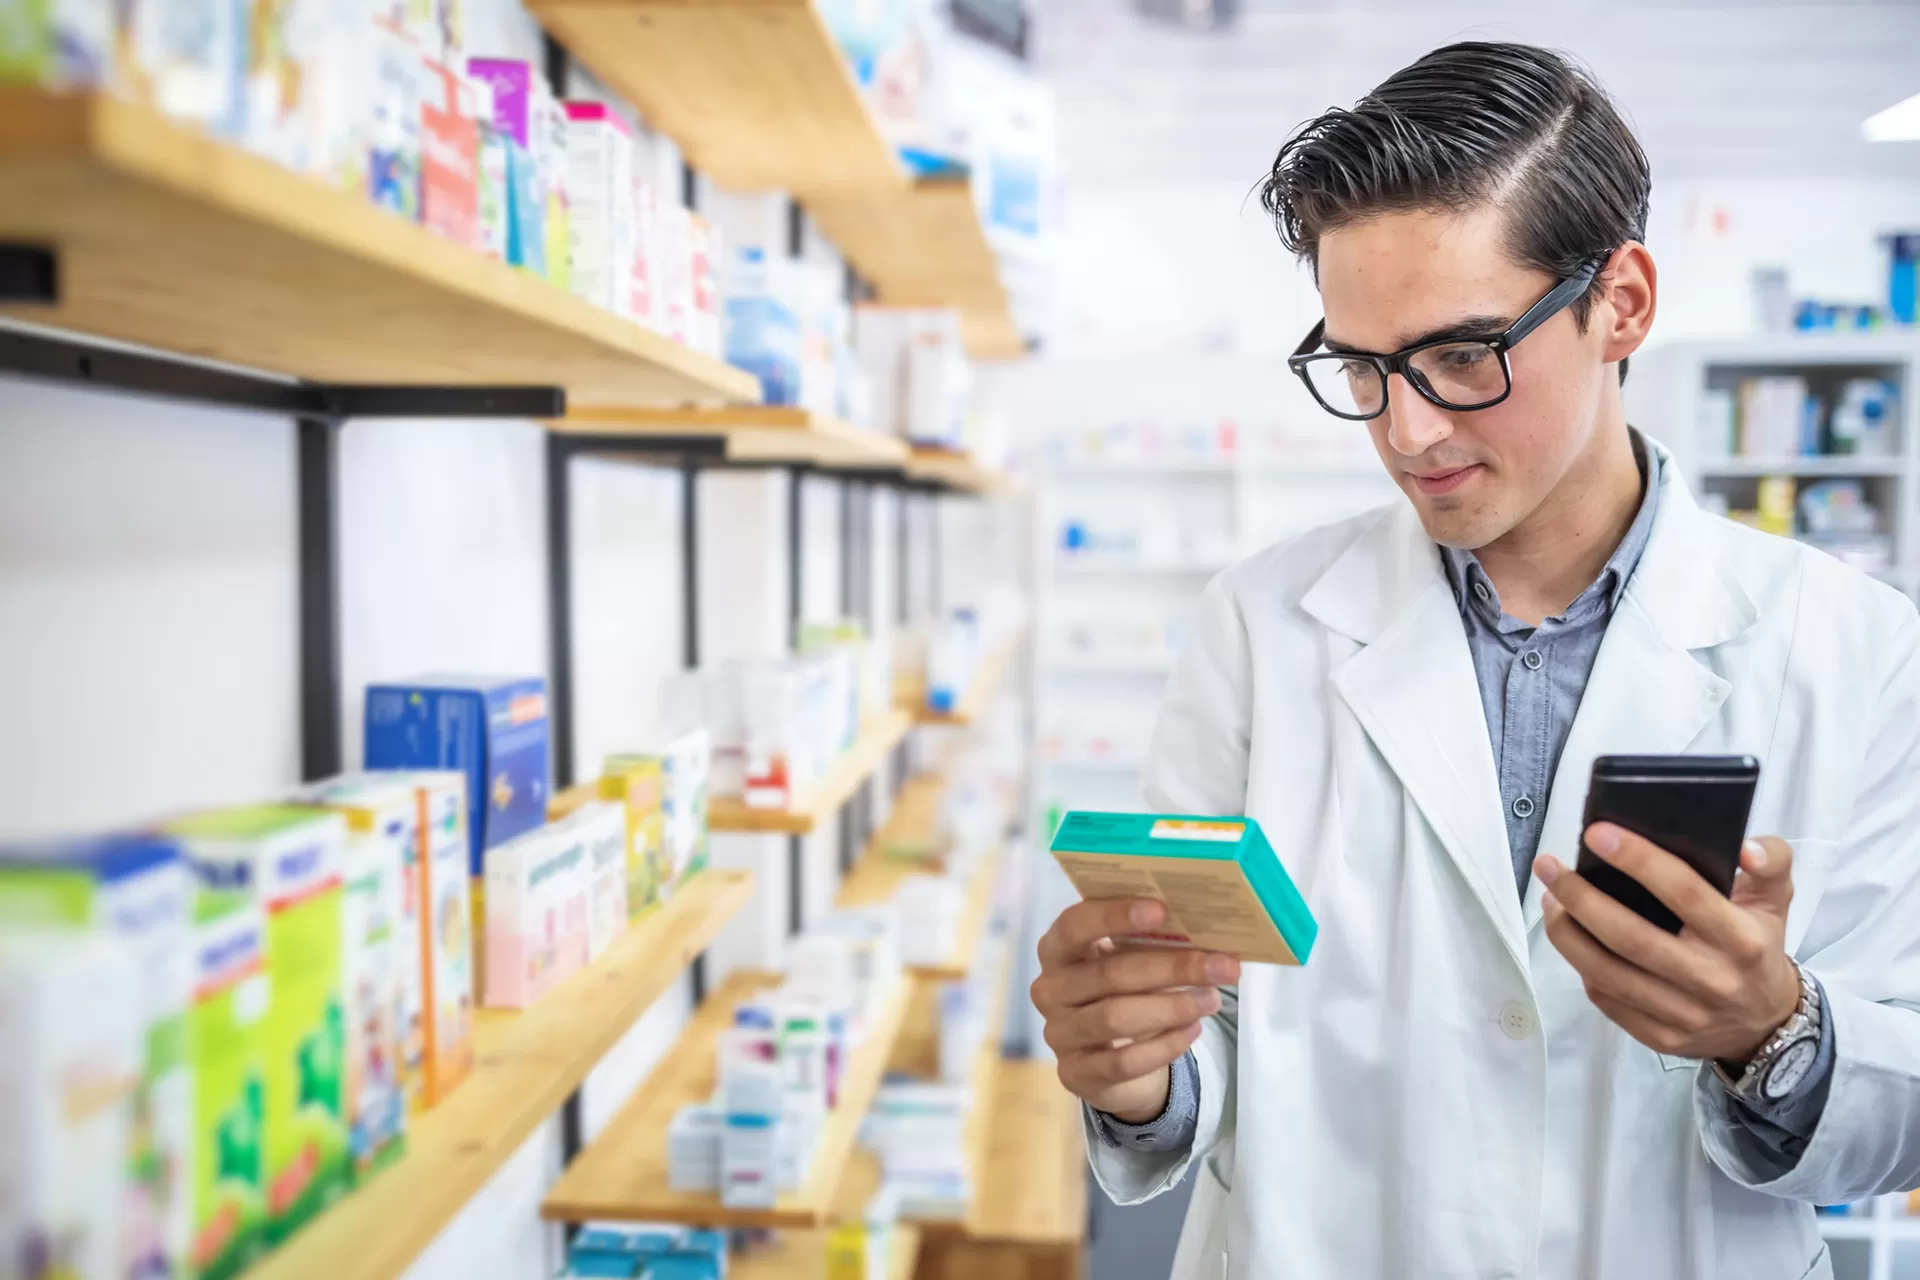 Implementing SAP S/4HANA for a generic medicines marketer